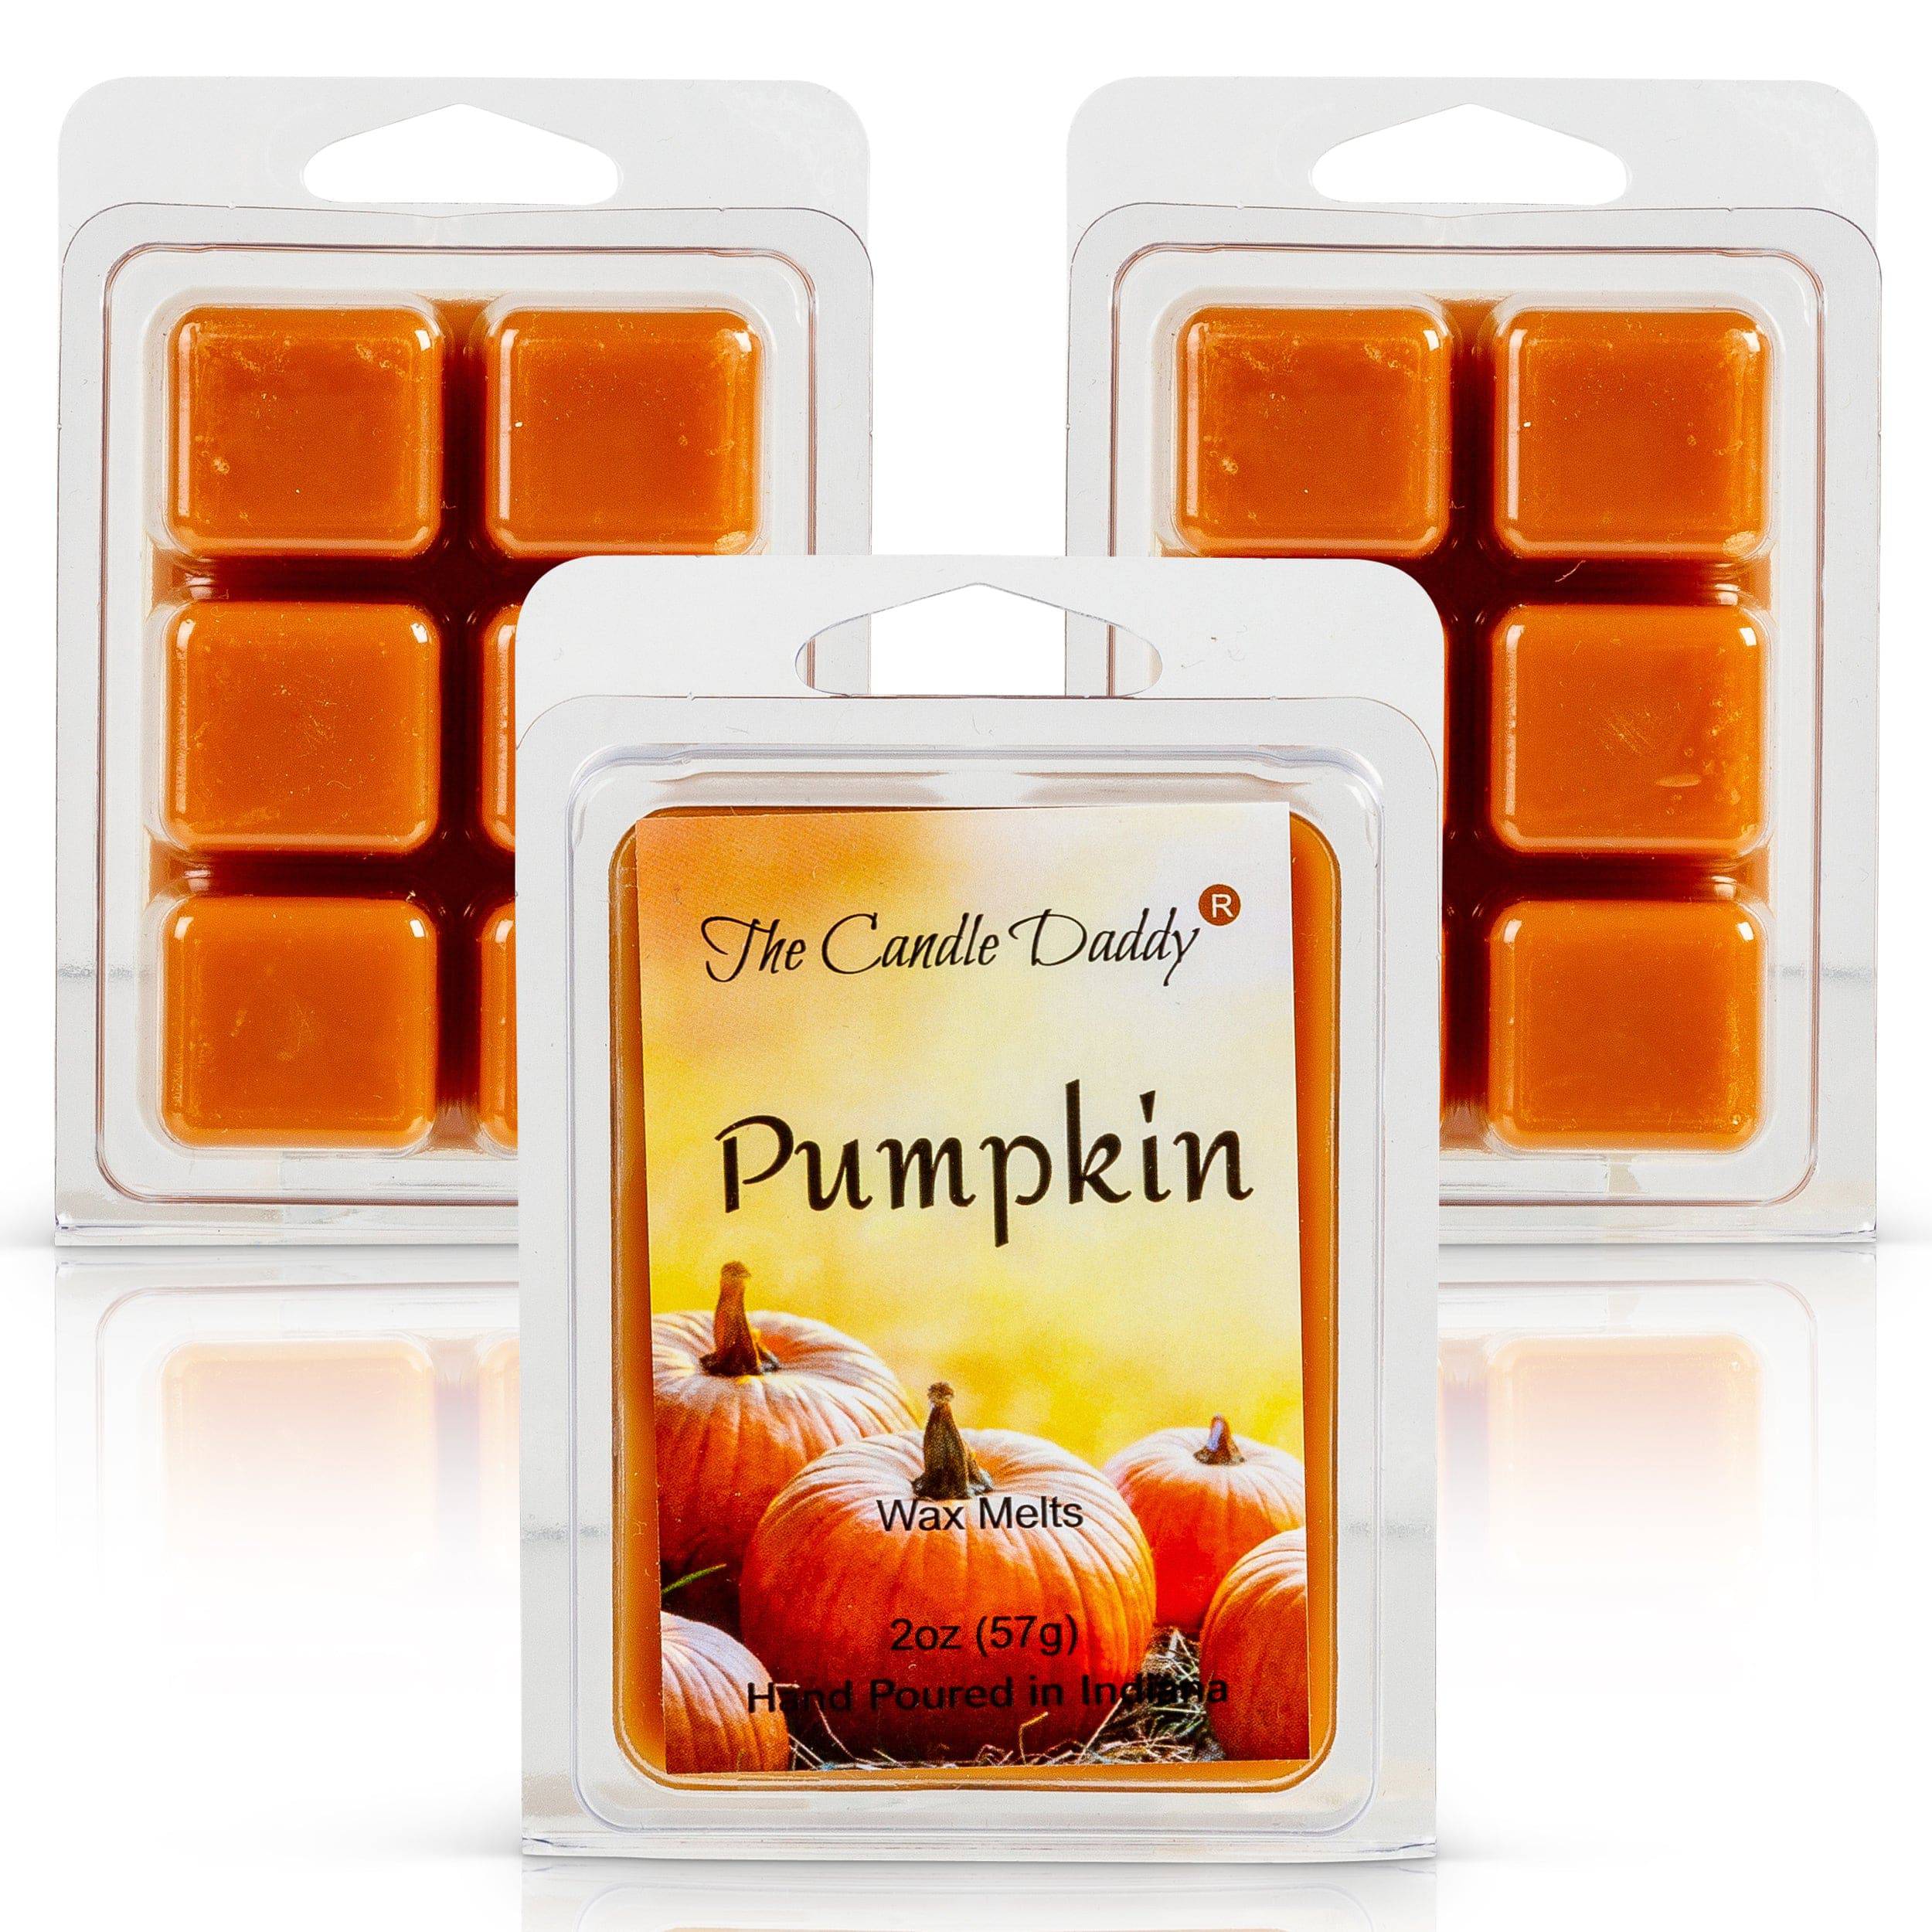 Boo! - Pumpkin Spice Scented Wax Melts - 1 Pack - 2 Ounces - 6